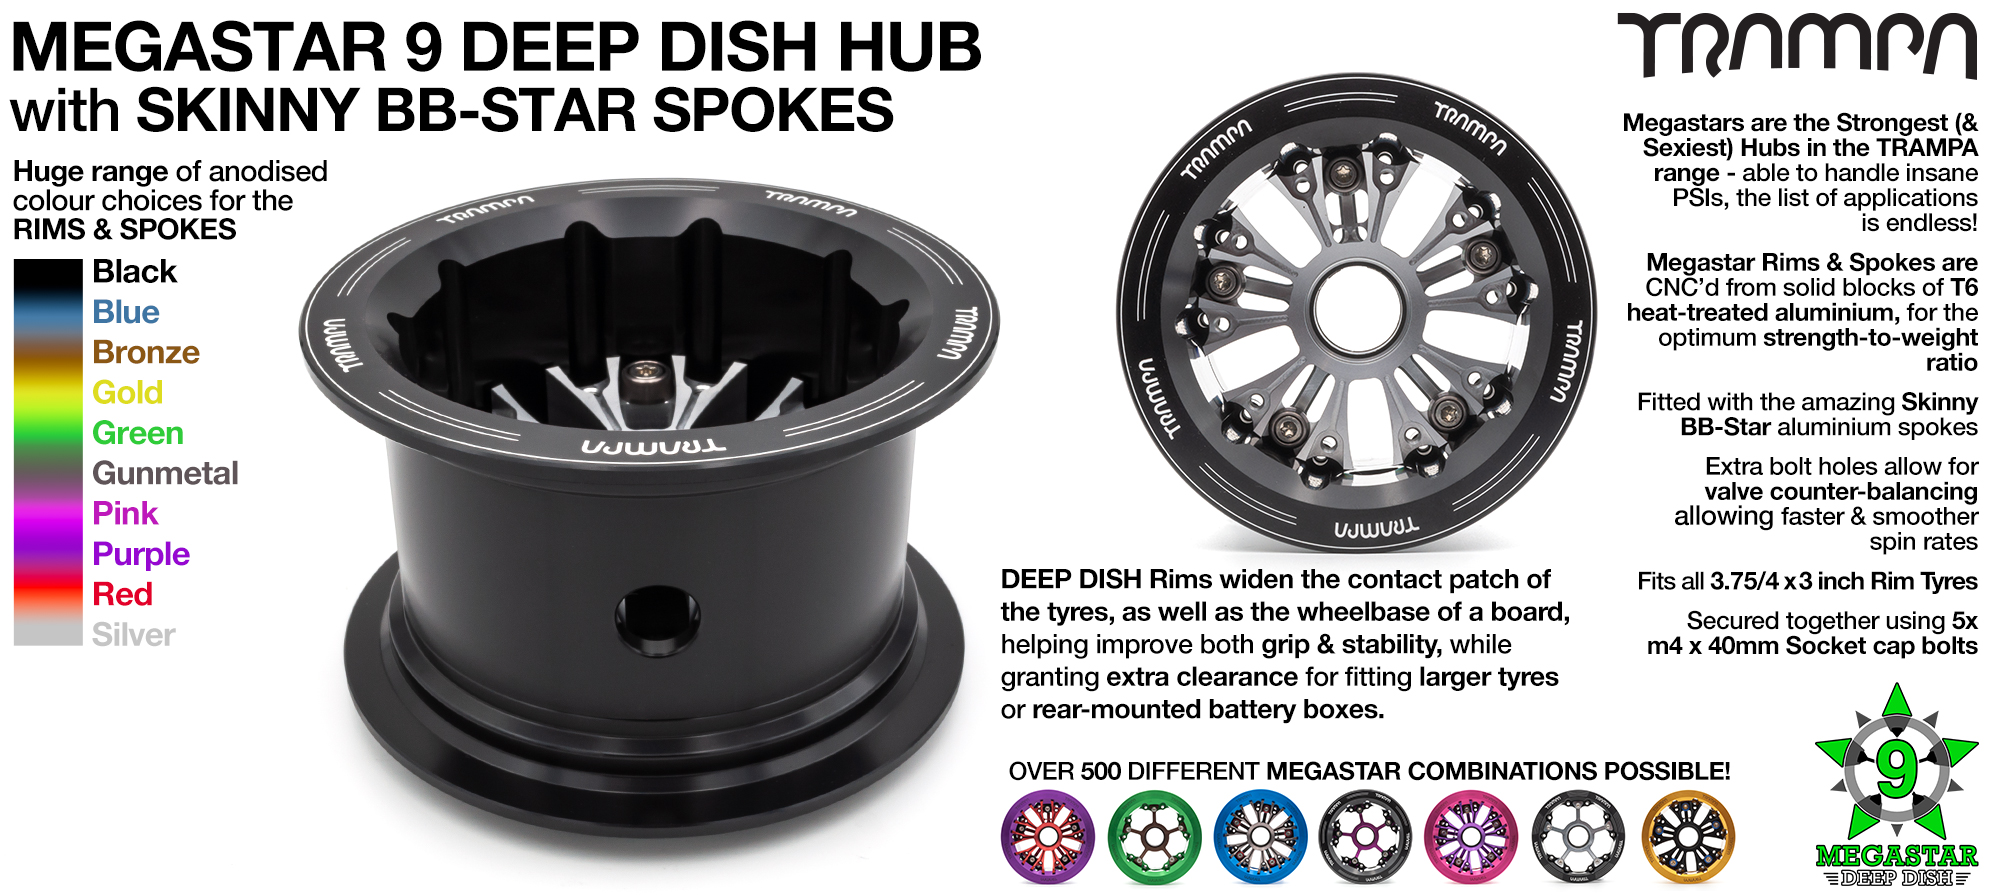 TRAMPA's Custom 4 x 3 Inch DEEP-DISH MEGASTAR 9 Hub of your dreams!! Any combination possible & fits upto 10 inch tyres too!